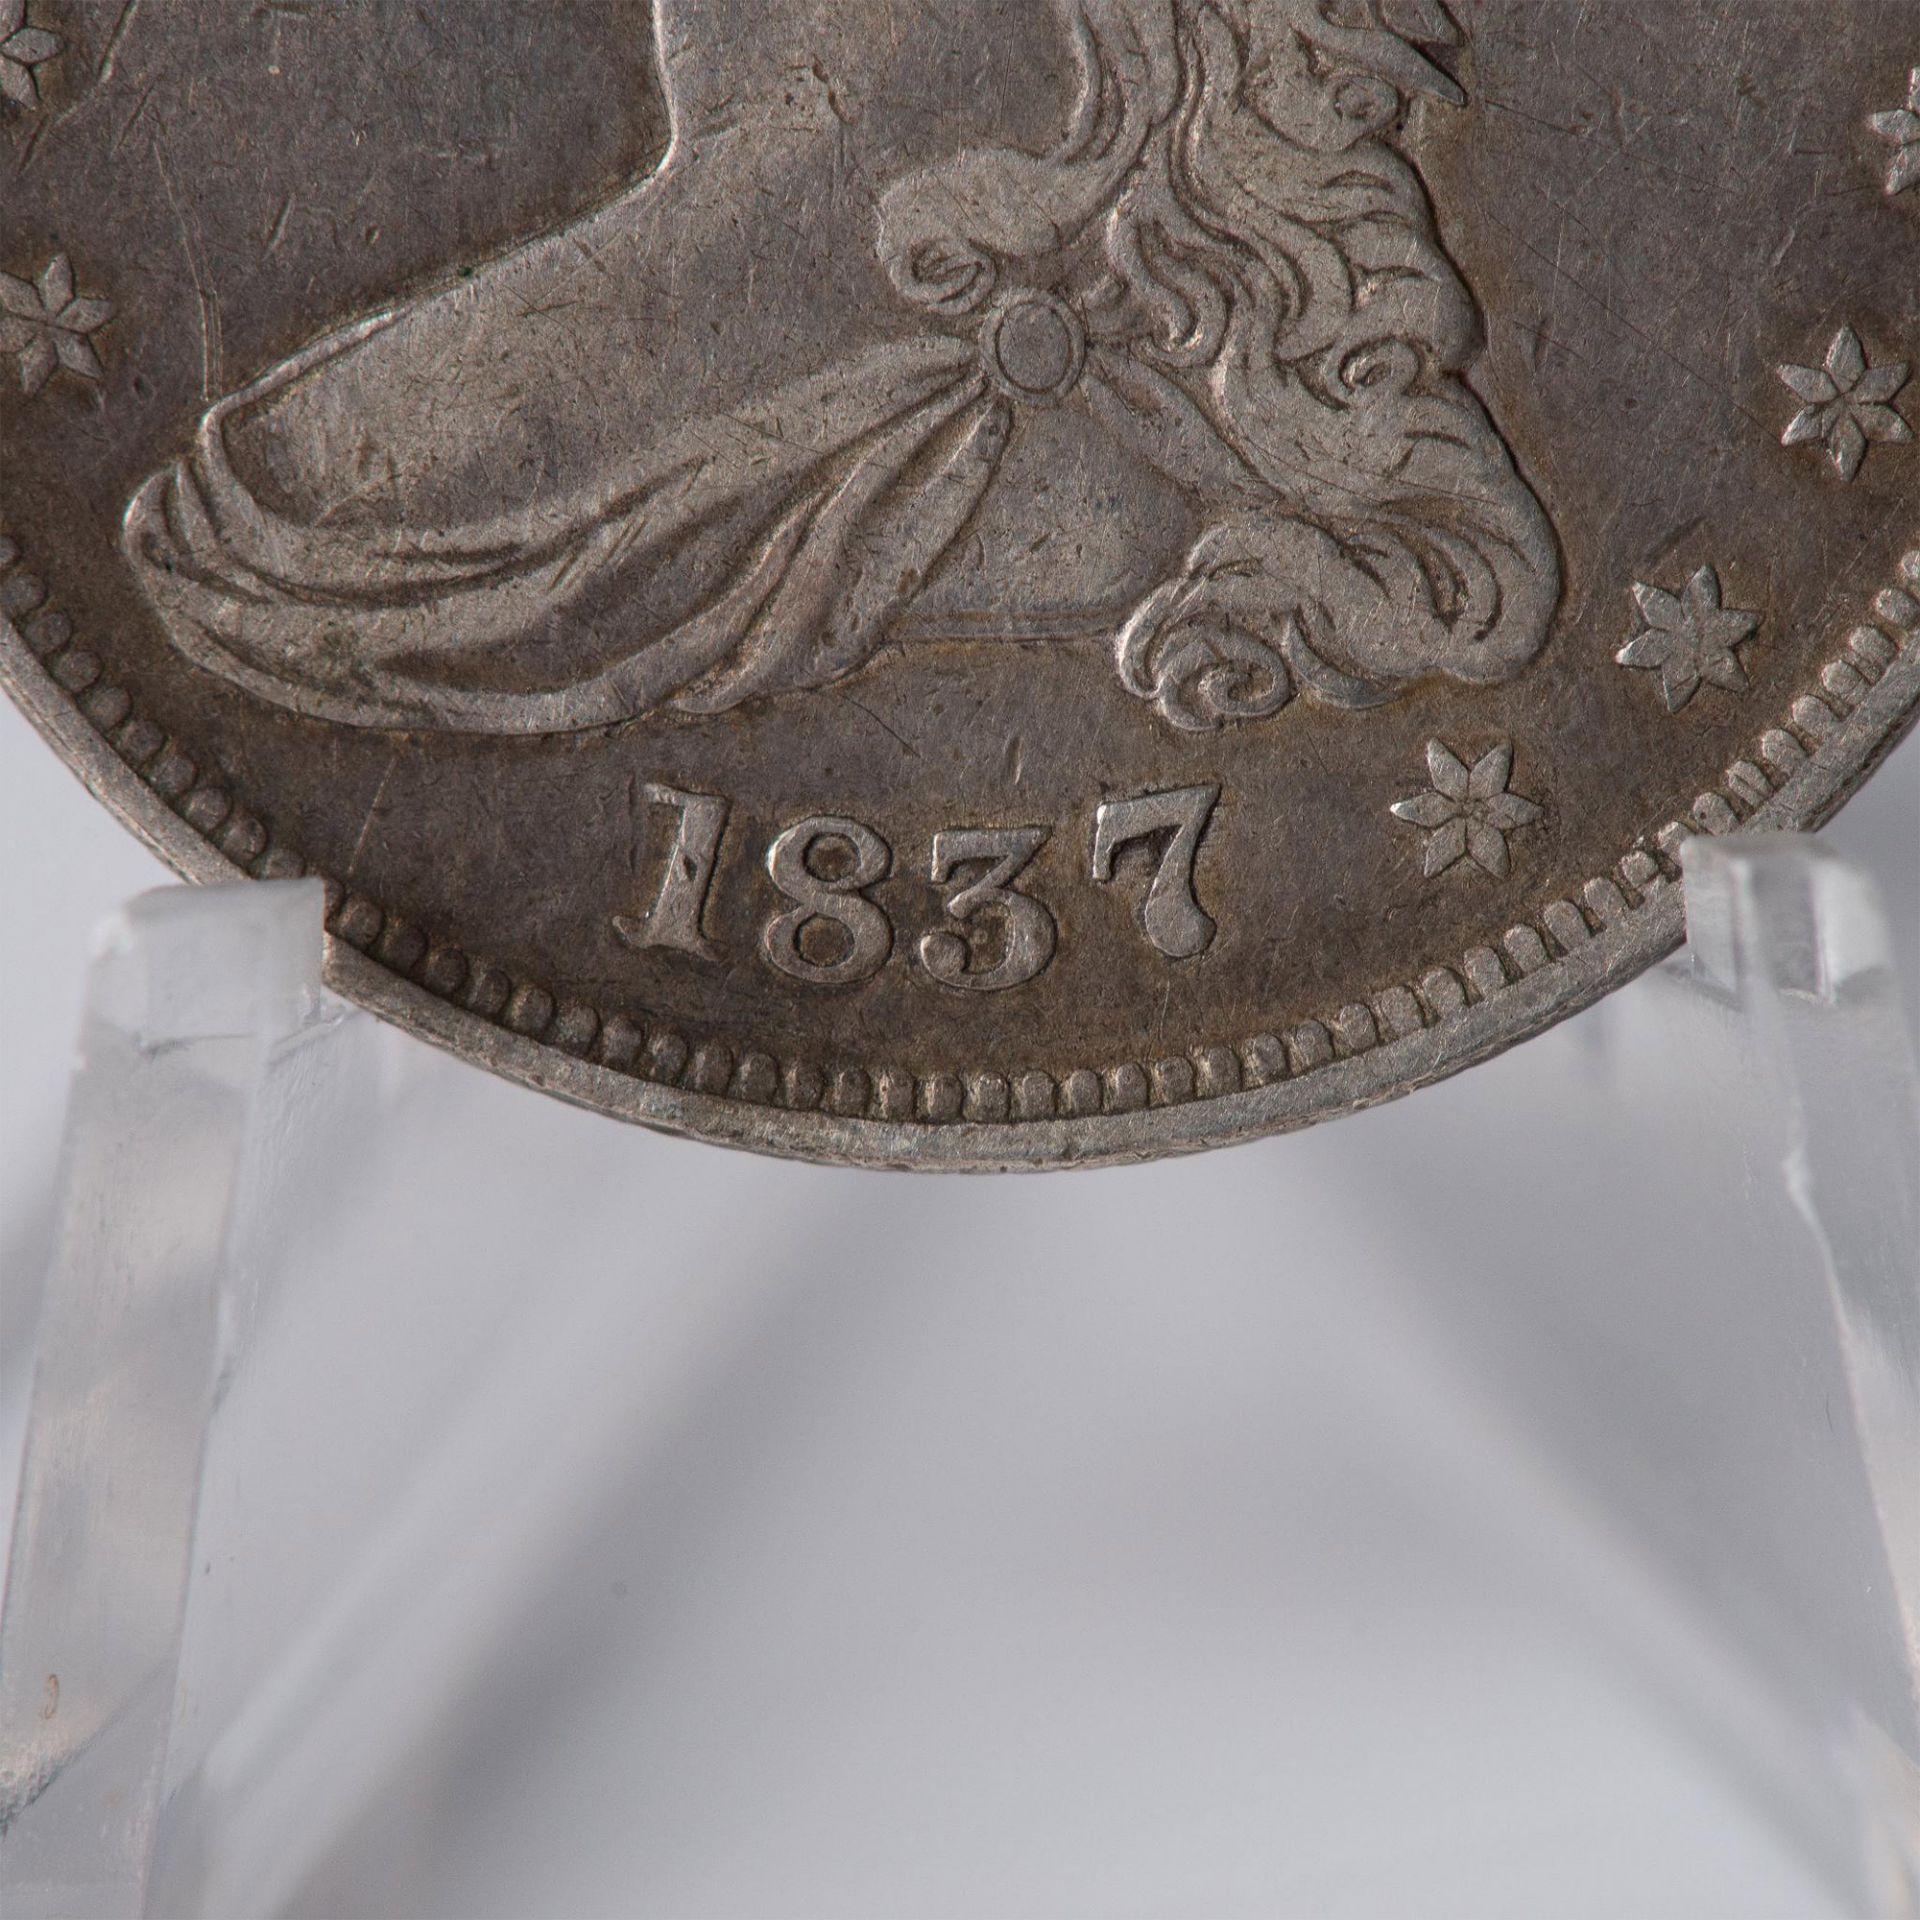 1837 CAPPED BUST HALF DOLLAR VF35 - Image 3 of 10